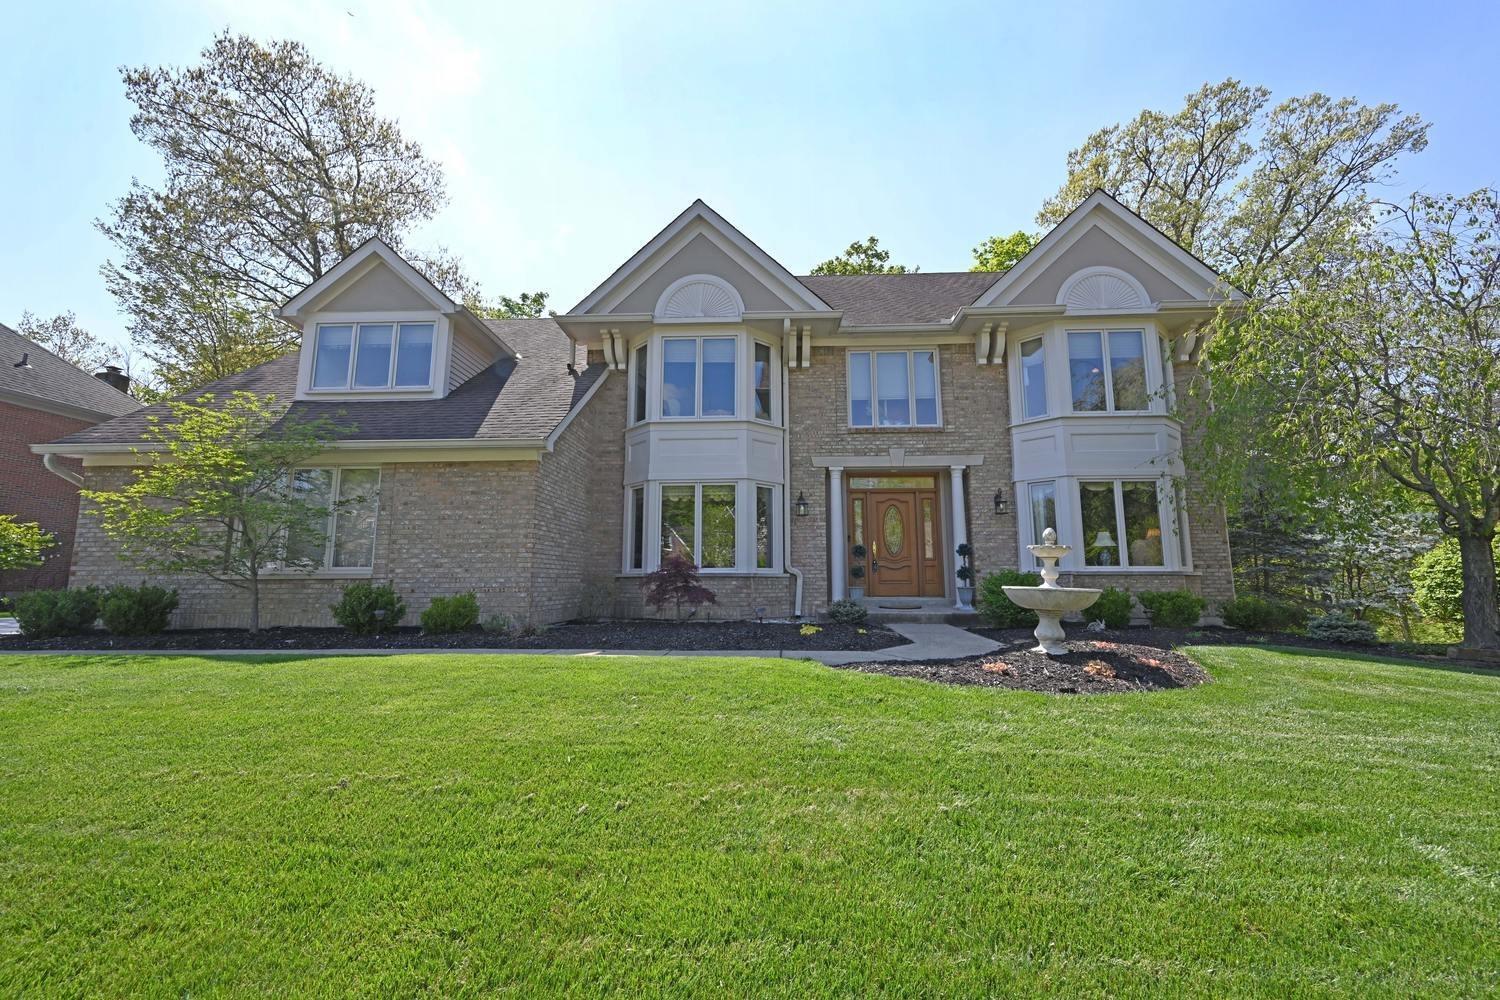 8081 Tanager Woods Ct, West Chester, OH 